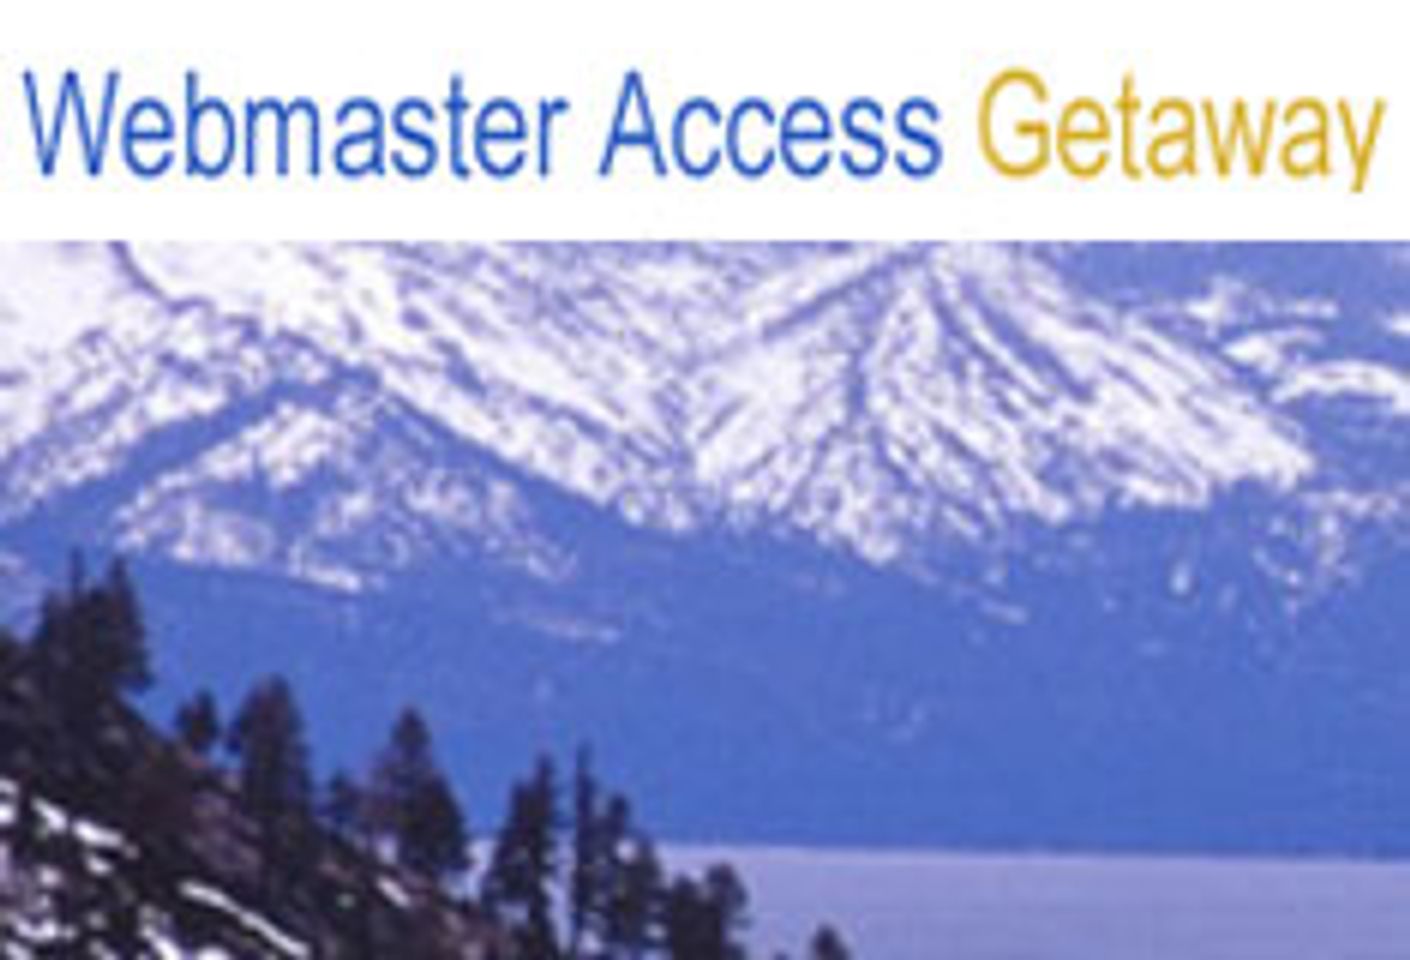 Lake Tahoe the New Home to Webmaster Access Getaway